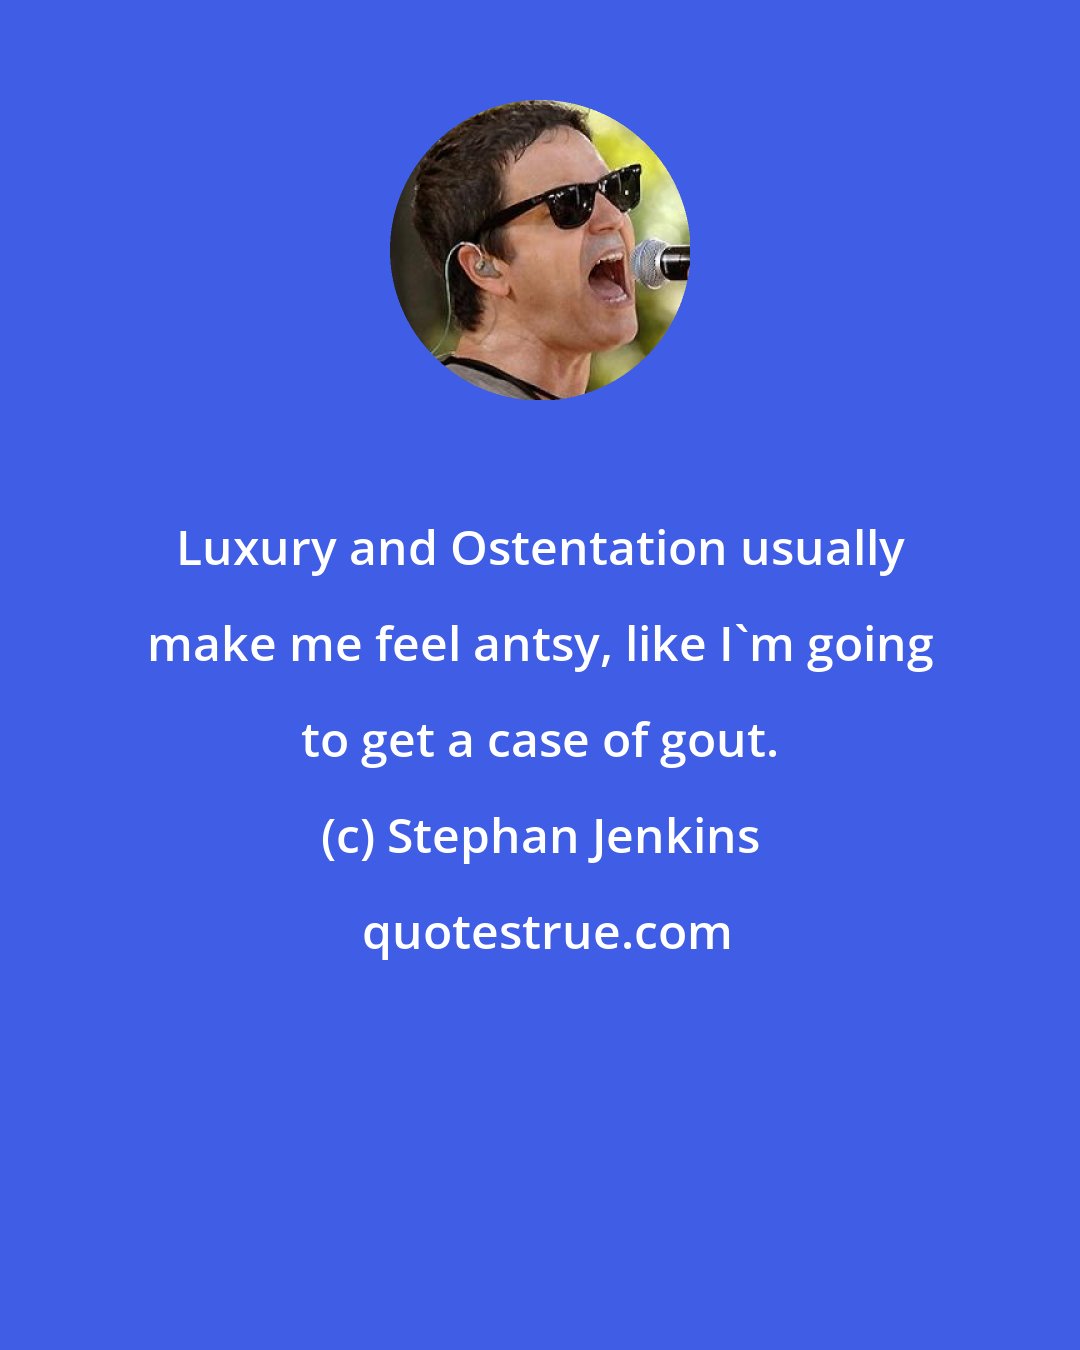 Stephan Jenkins: Luxury and Ostentation usually make me feel antsy, like I'm going to get a case of gout.